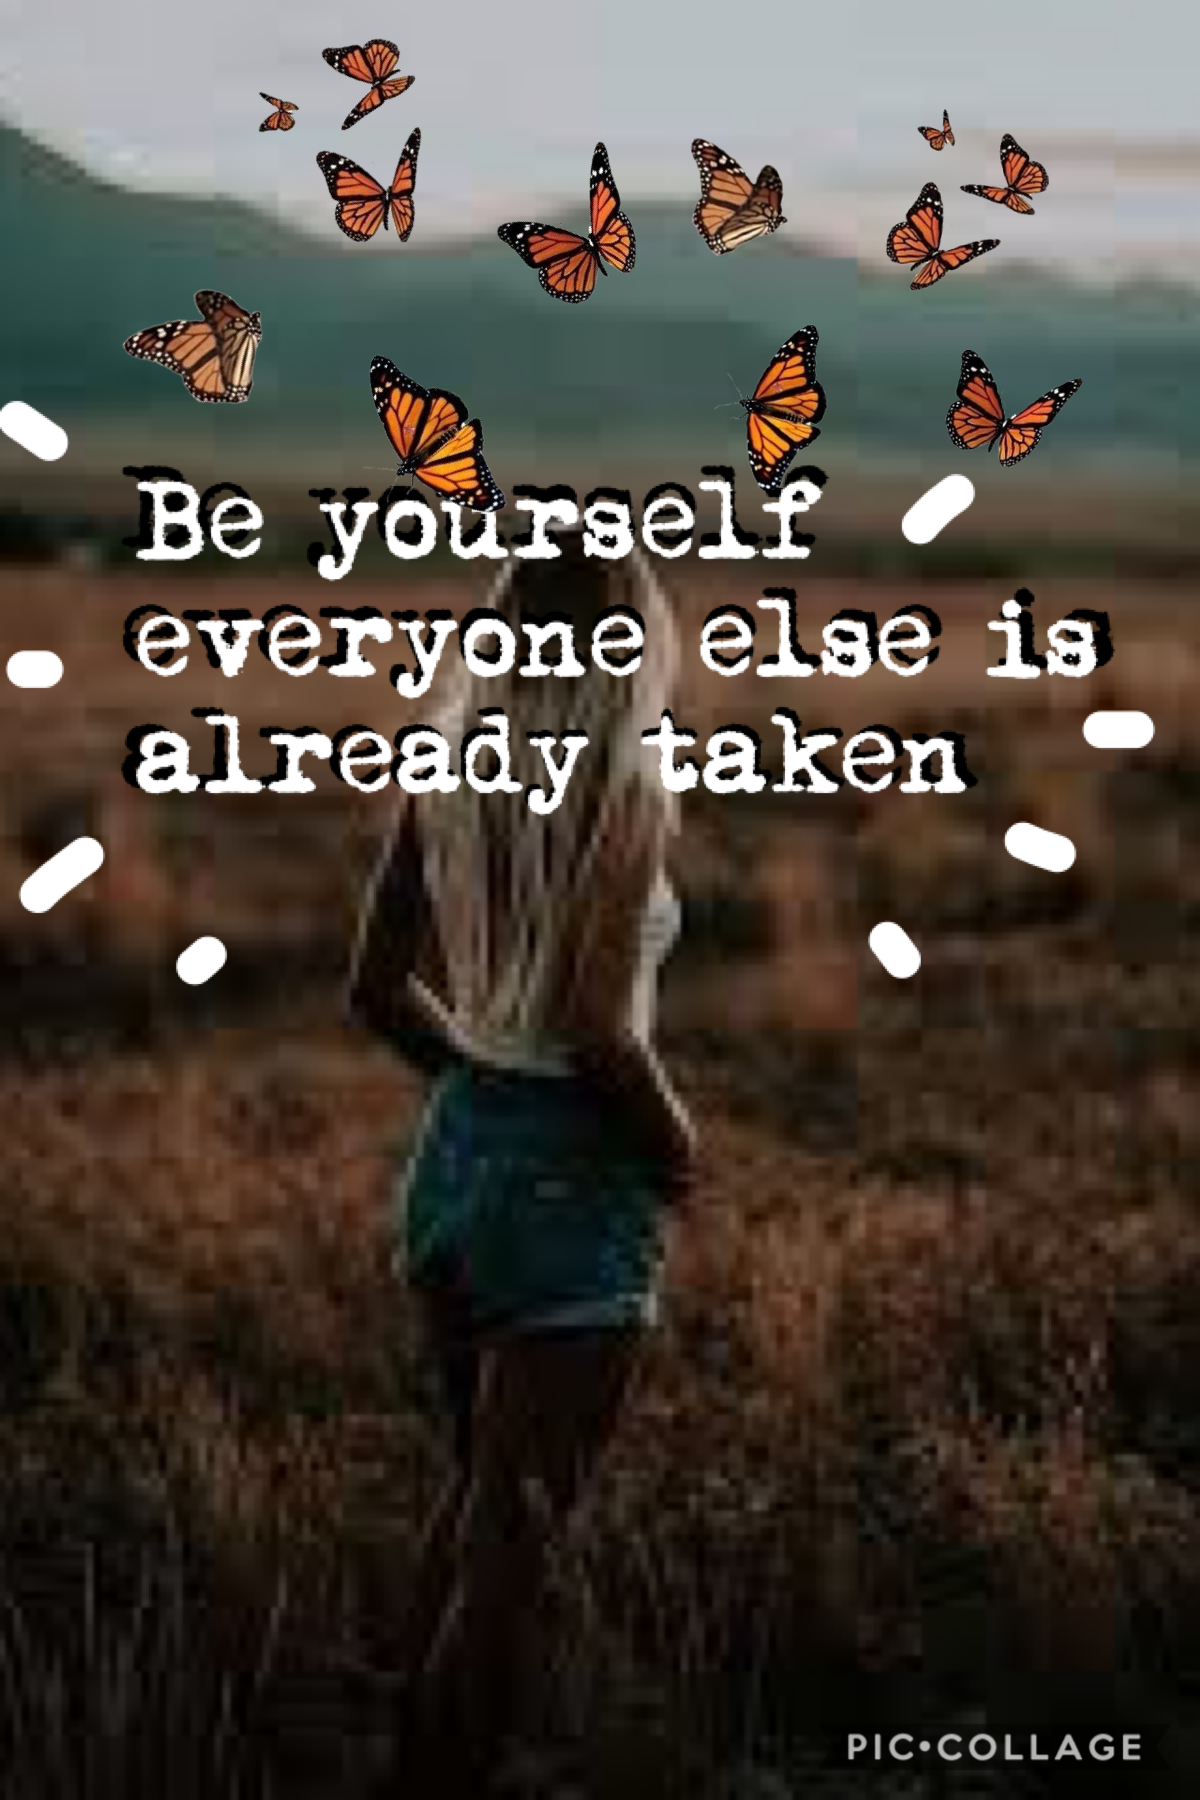 tap🦋

Remember to just be yourself your perfect the way you are